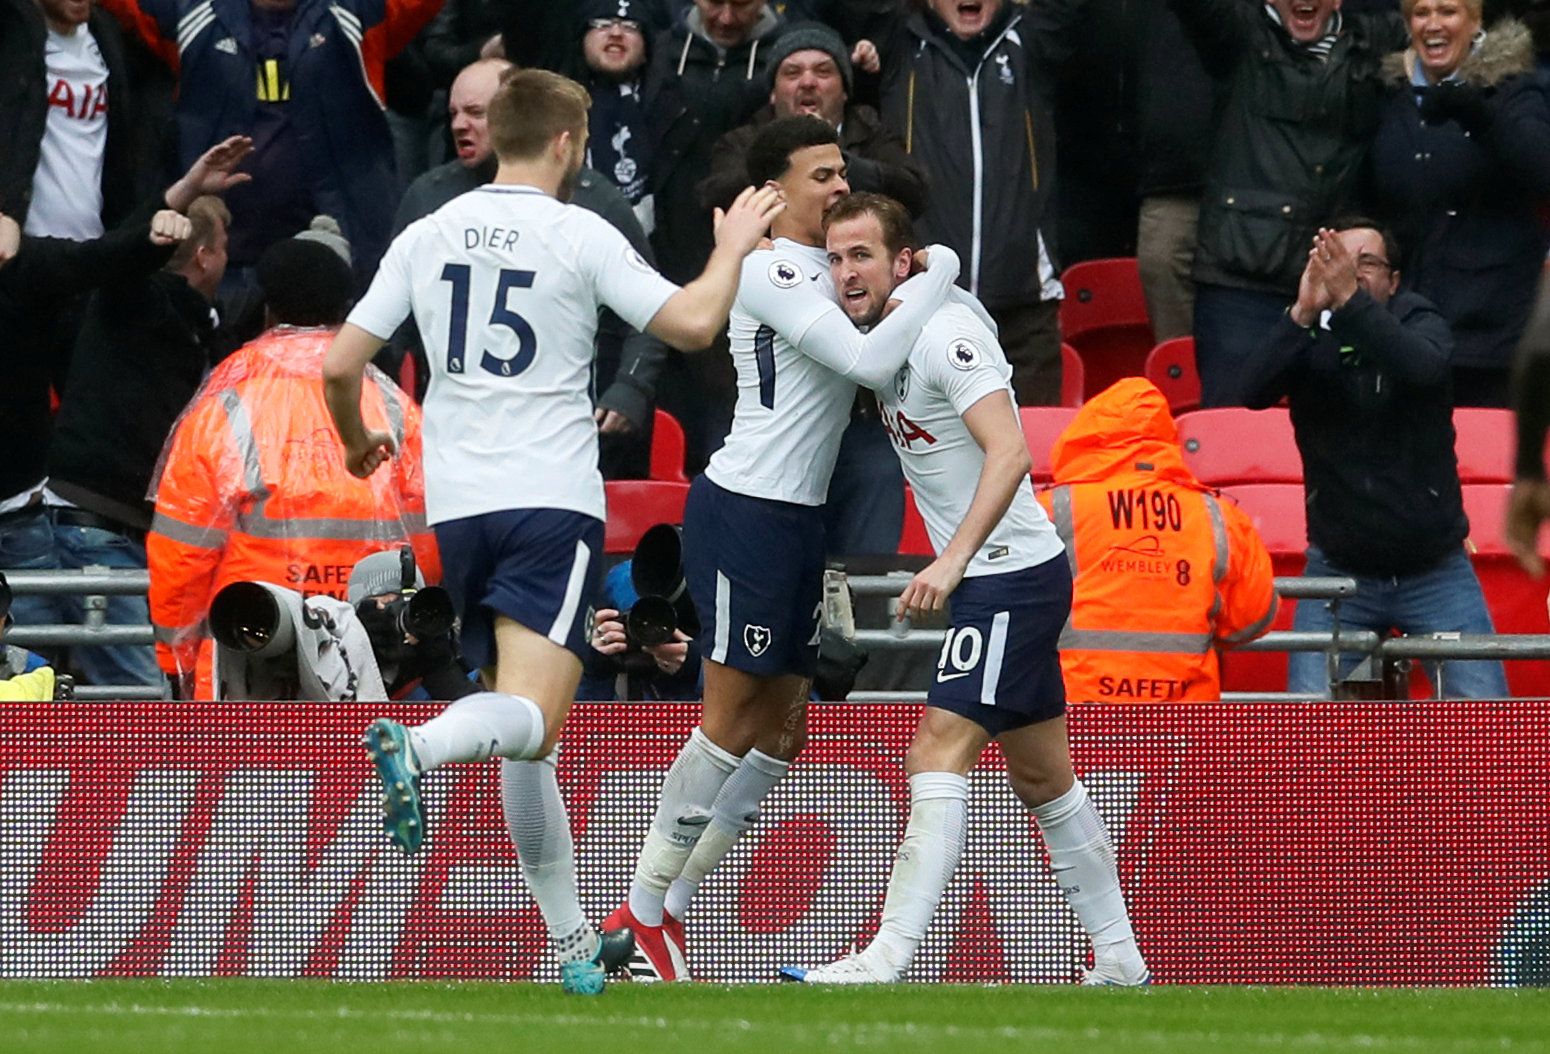 Soccer Football - Premier League - Tottenham Hotspur vs Arsenal - Wembley Stadium, London, Britain - February 10, 2018   Tottenham's Harry Kane celebrates scoring their first goal with team mates    REUTERS/David Klein    EDITORIAL USE ONLY. No use with unauthorized audio, video, data, fixture lists, club/league logos or 